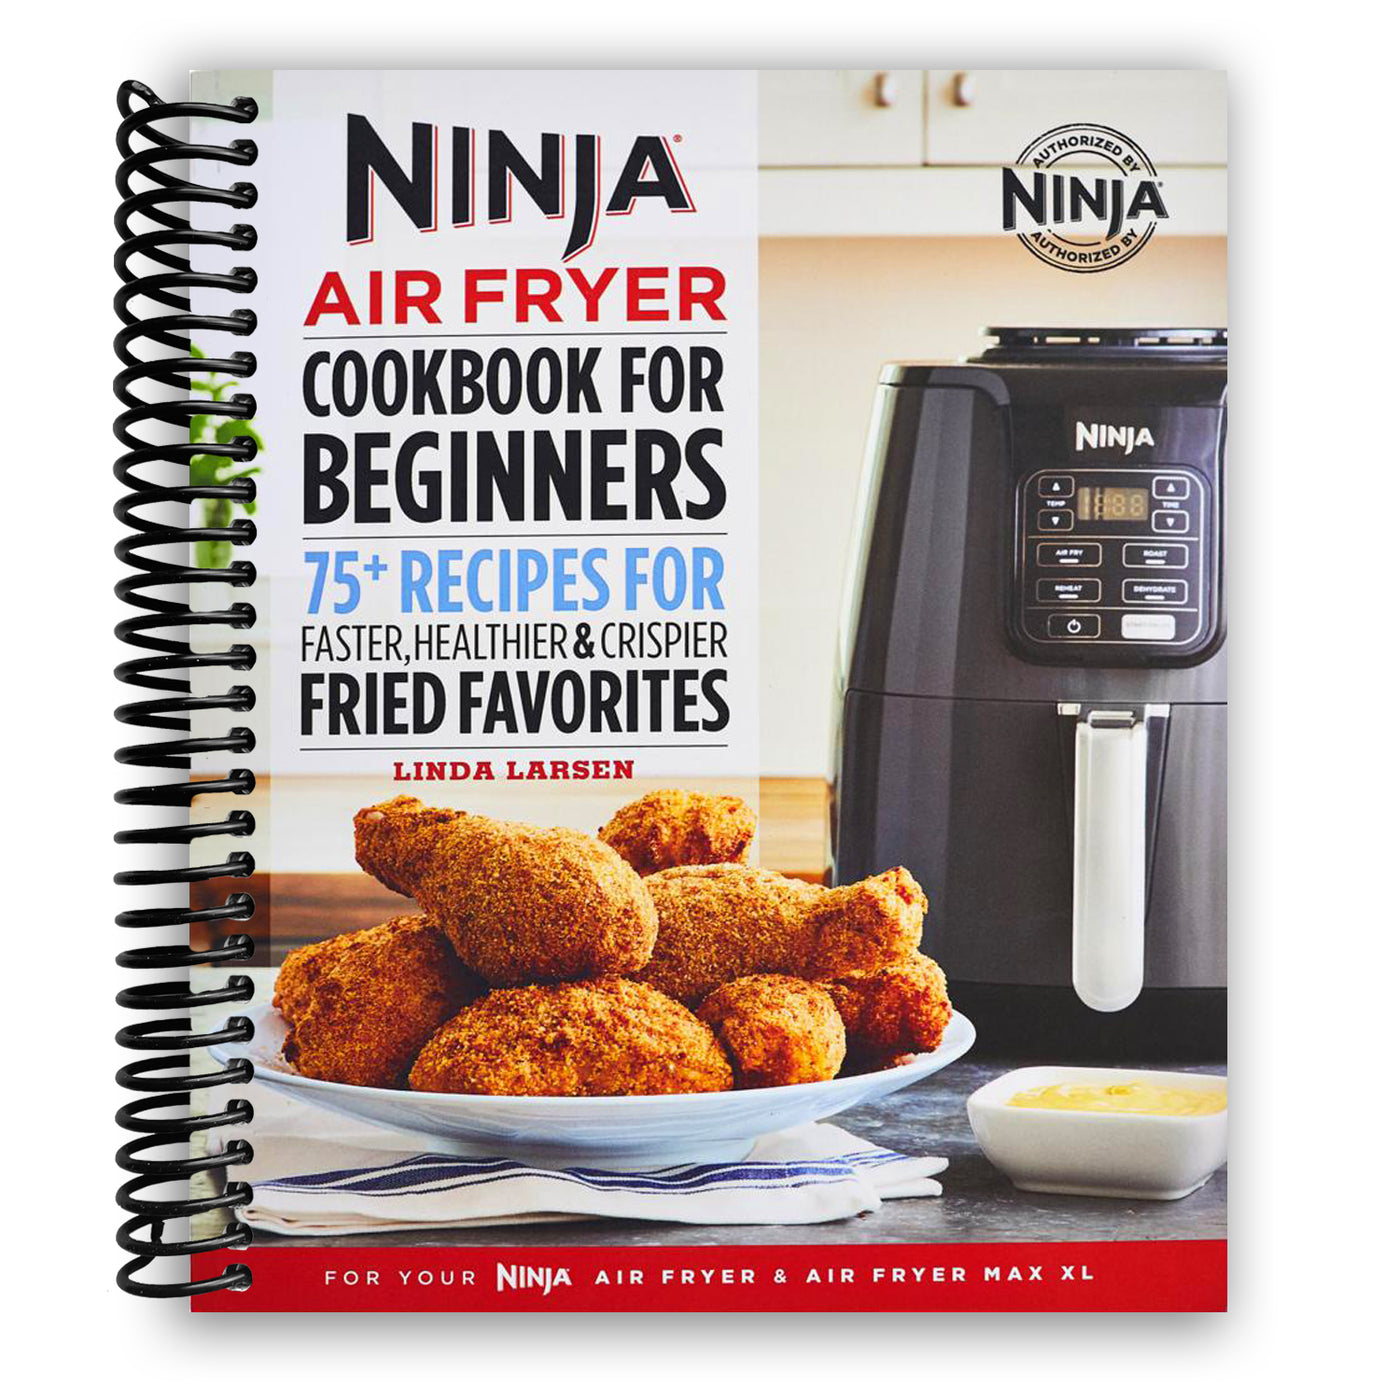 The Official Ninja Air Fryer Cookbook for Beginners: 75+ Recipes for Faster, Healthier, & Crispier Fried Favorites [Book]